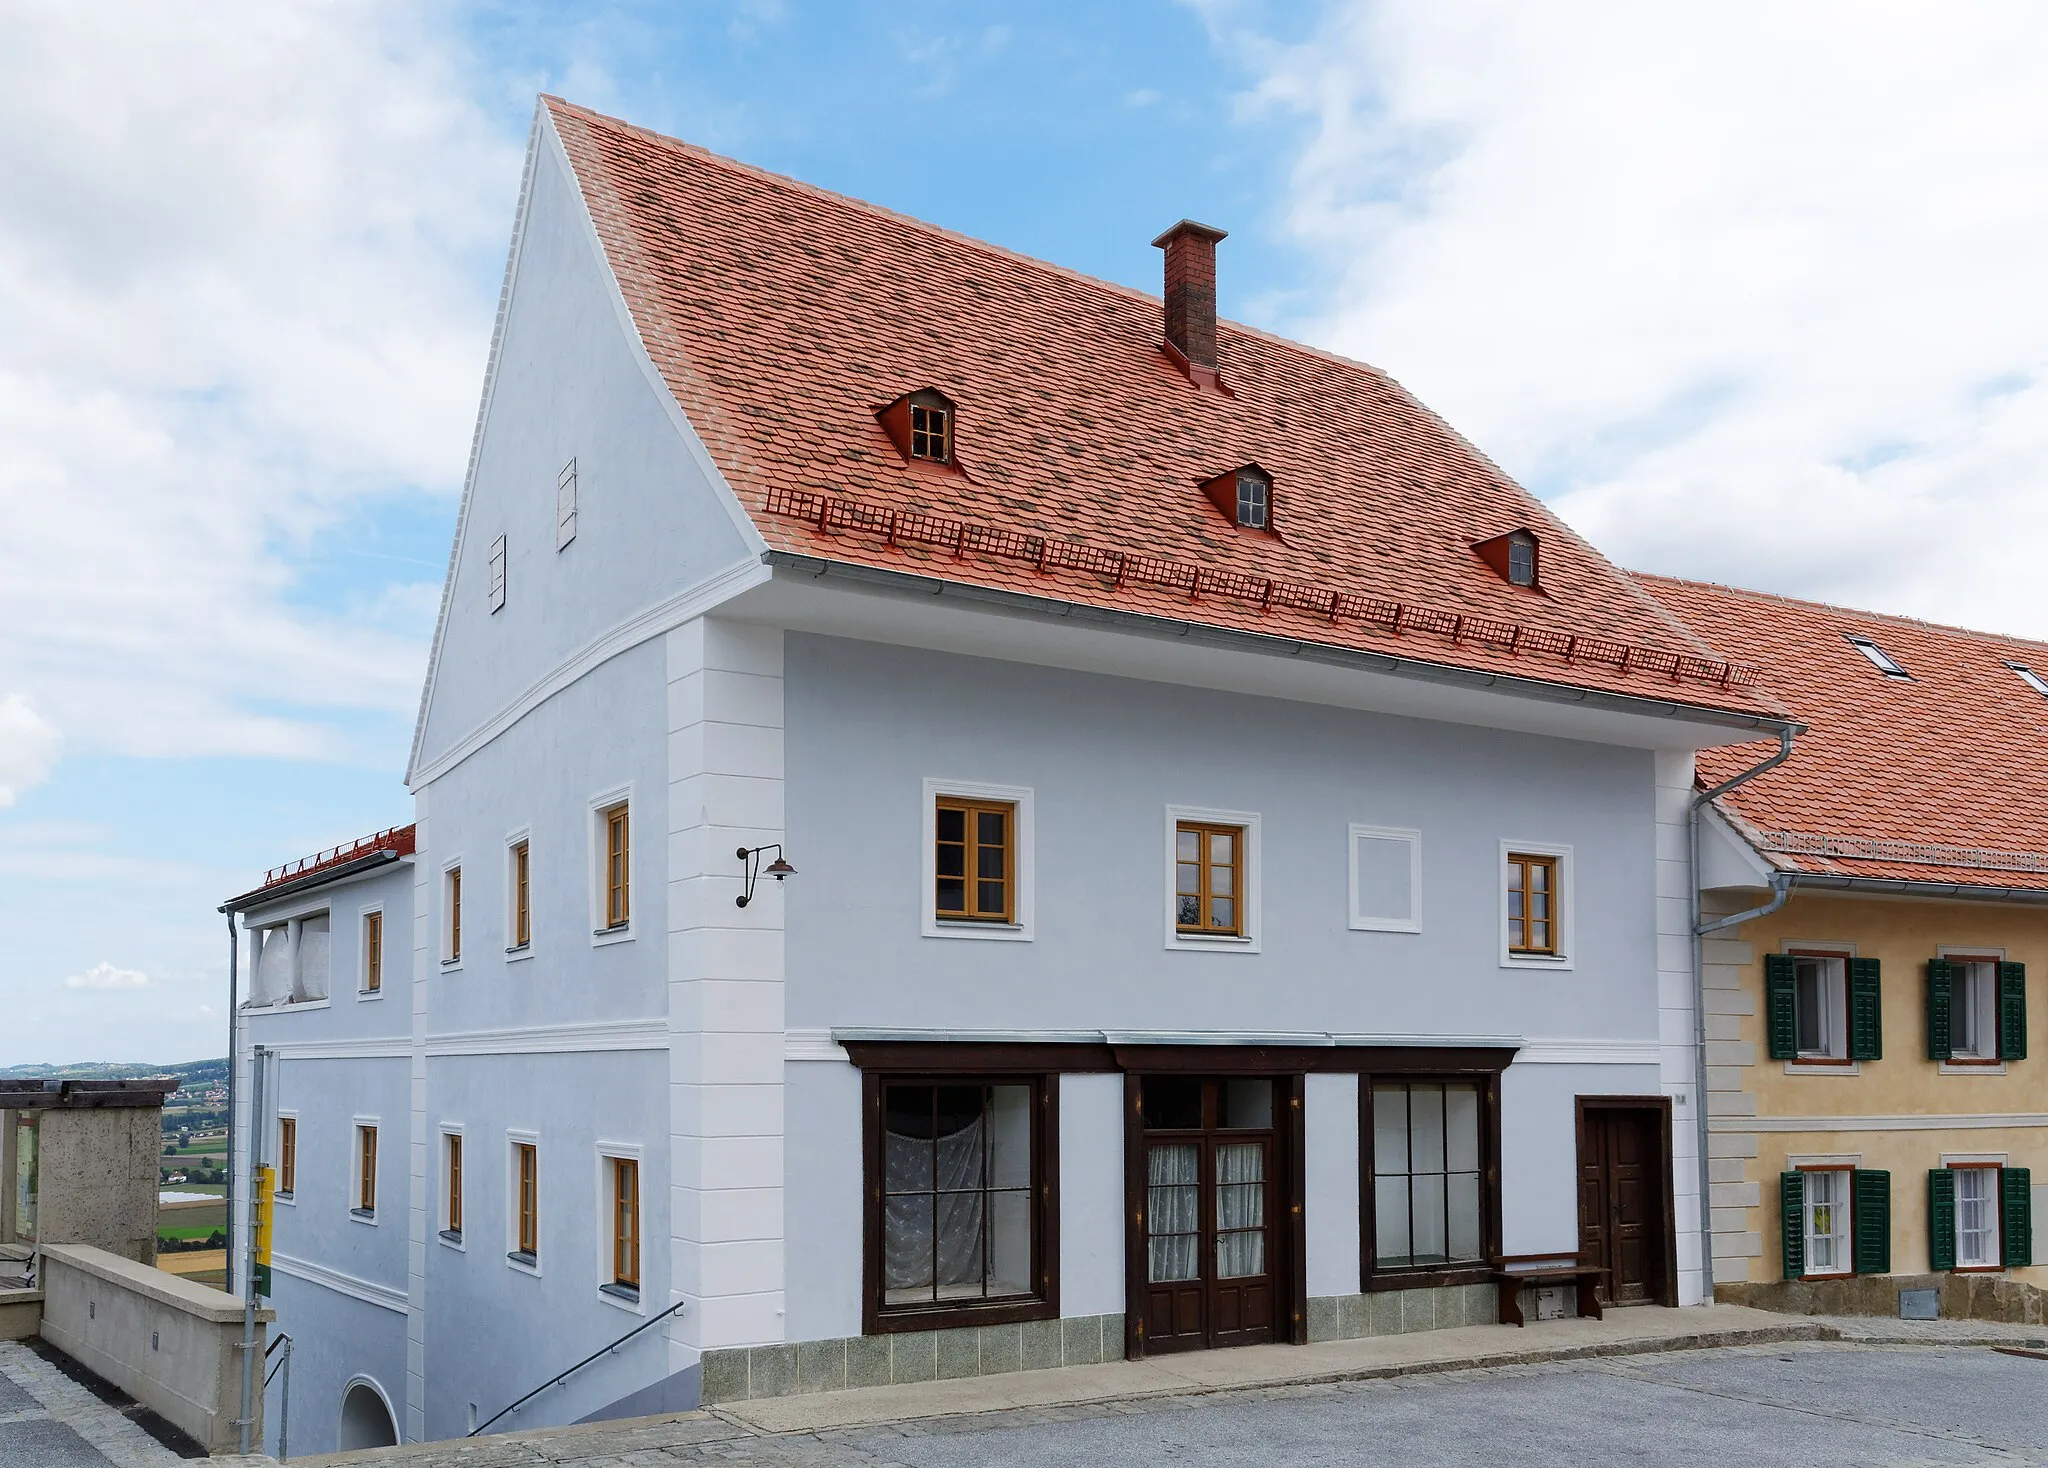 Photo showing: Residential and commercial building in Straden, Styria, Austria